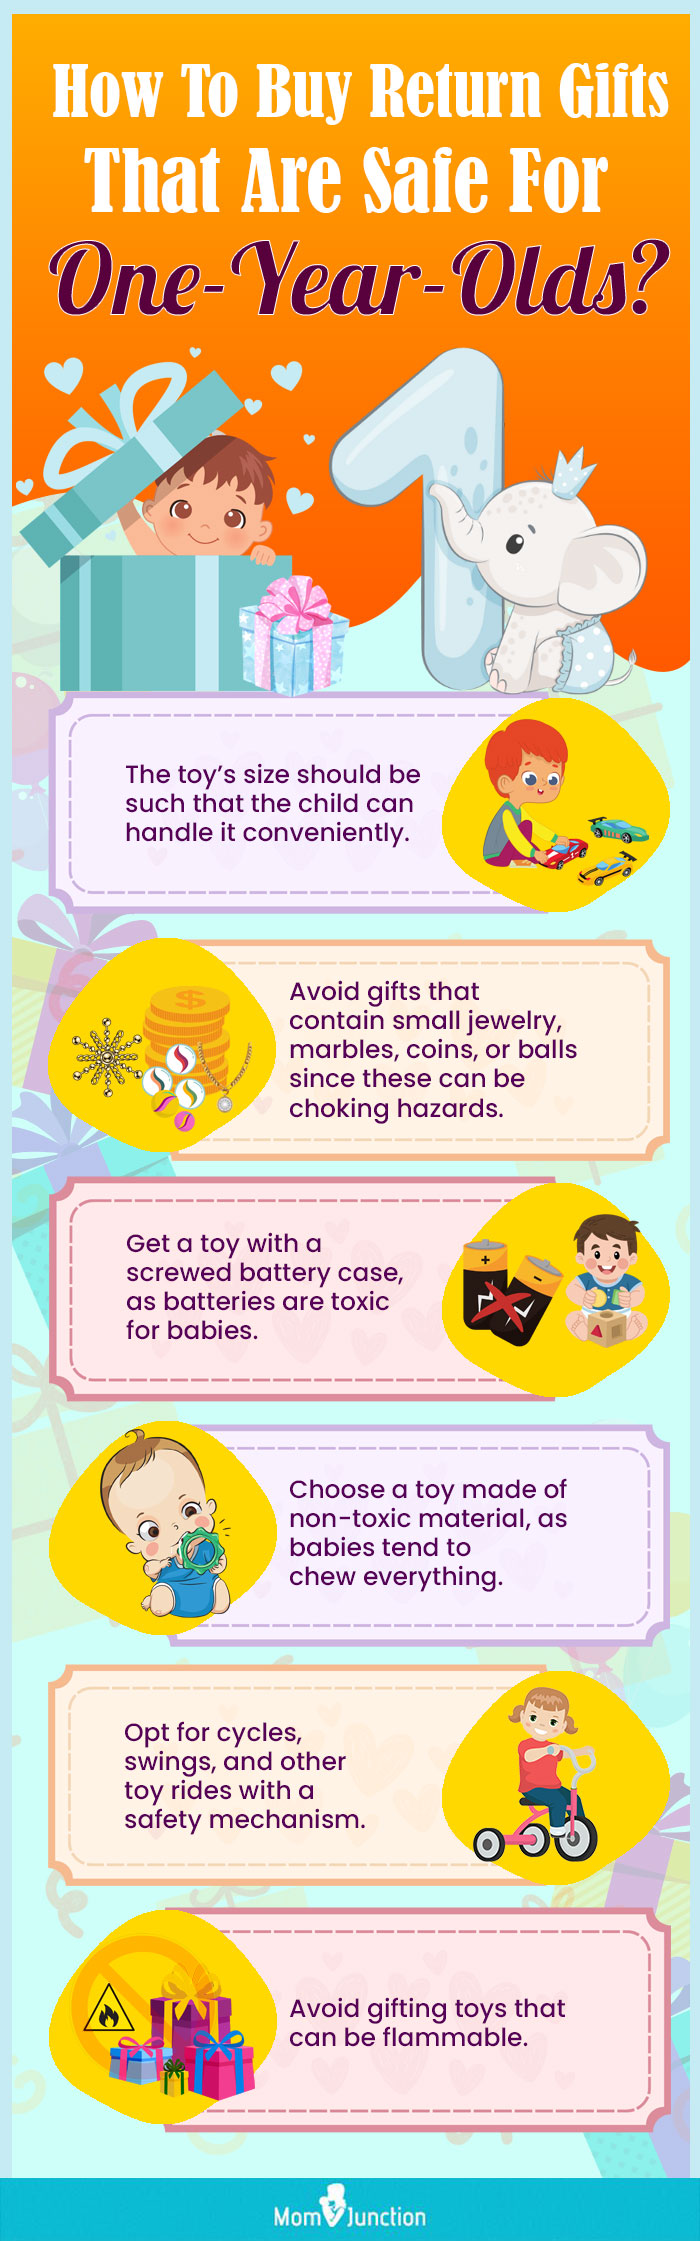 How To Buy Return Gifts That Are Safe For One Year Olds(infographic)